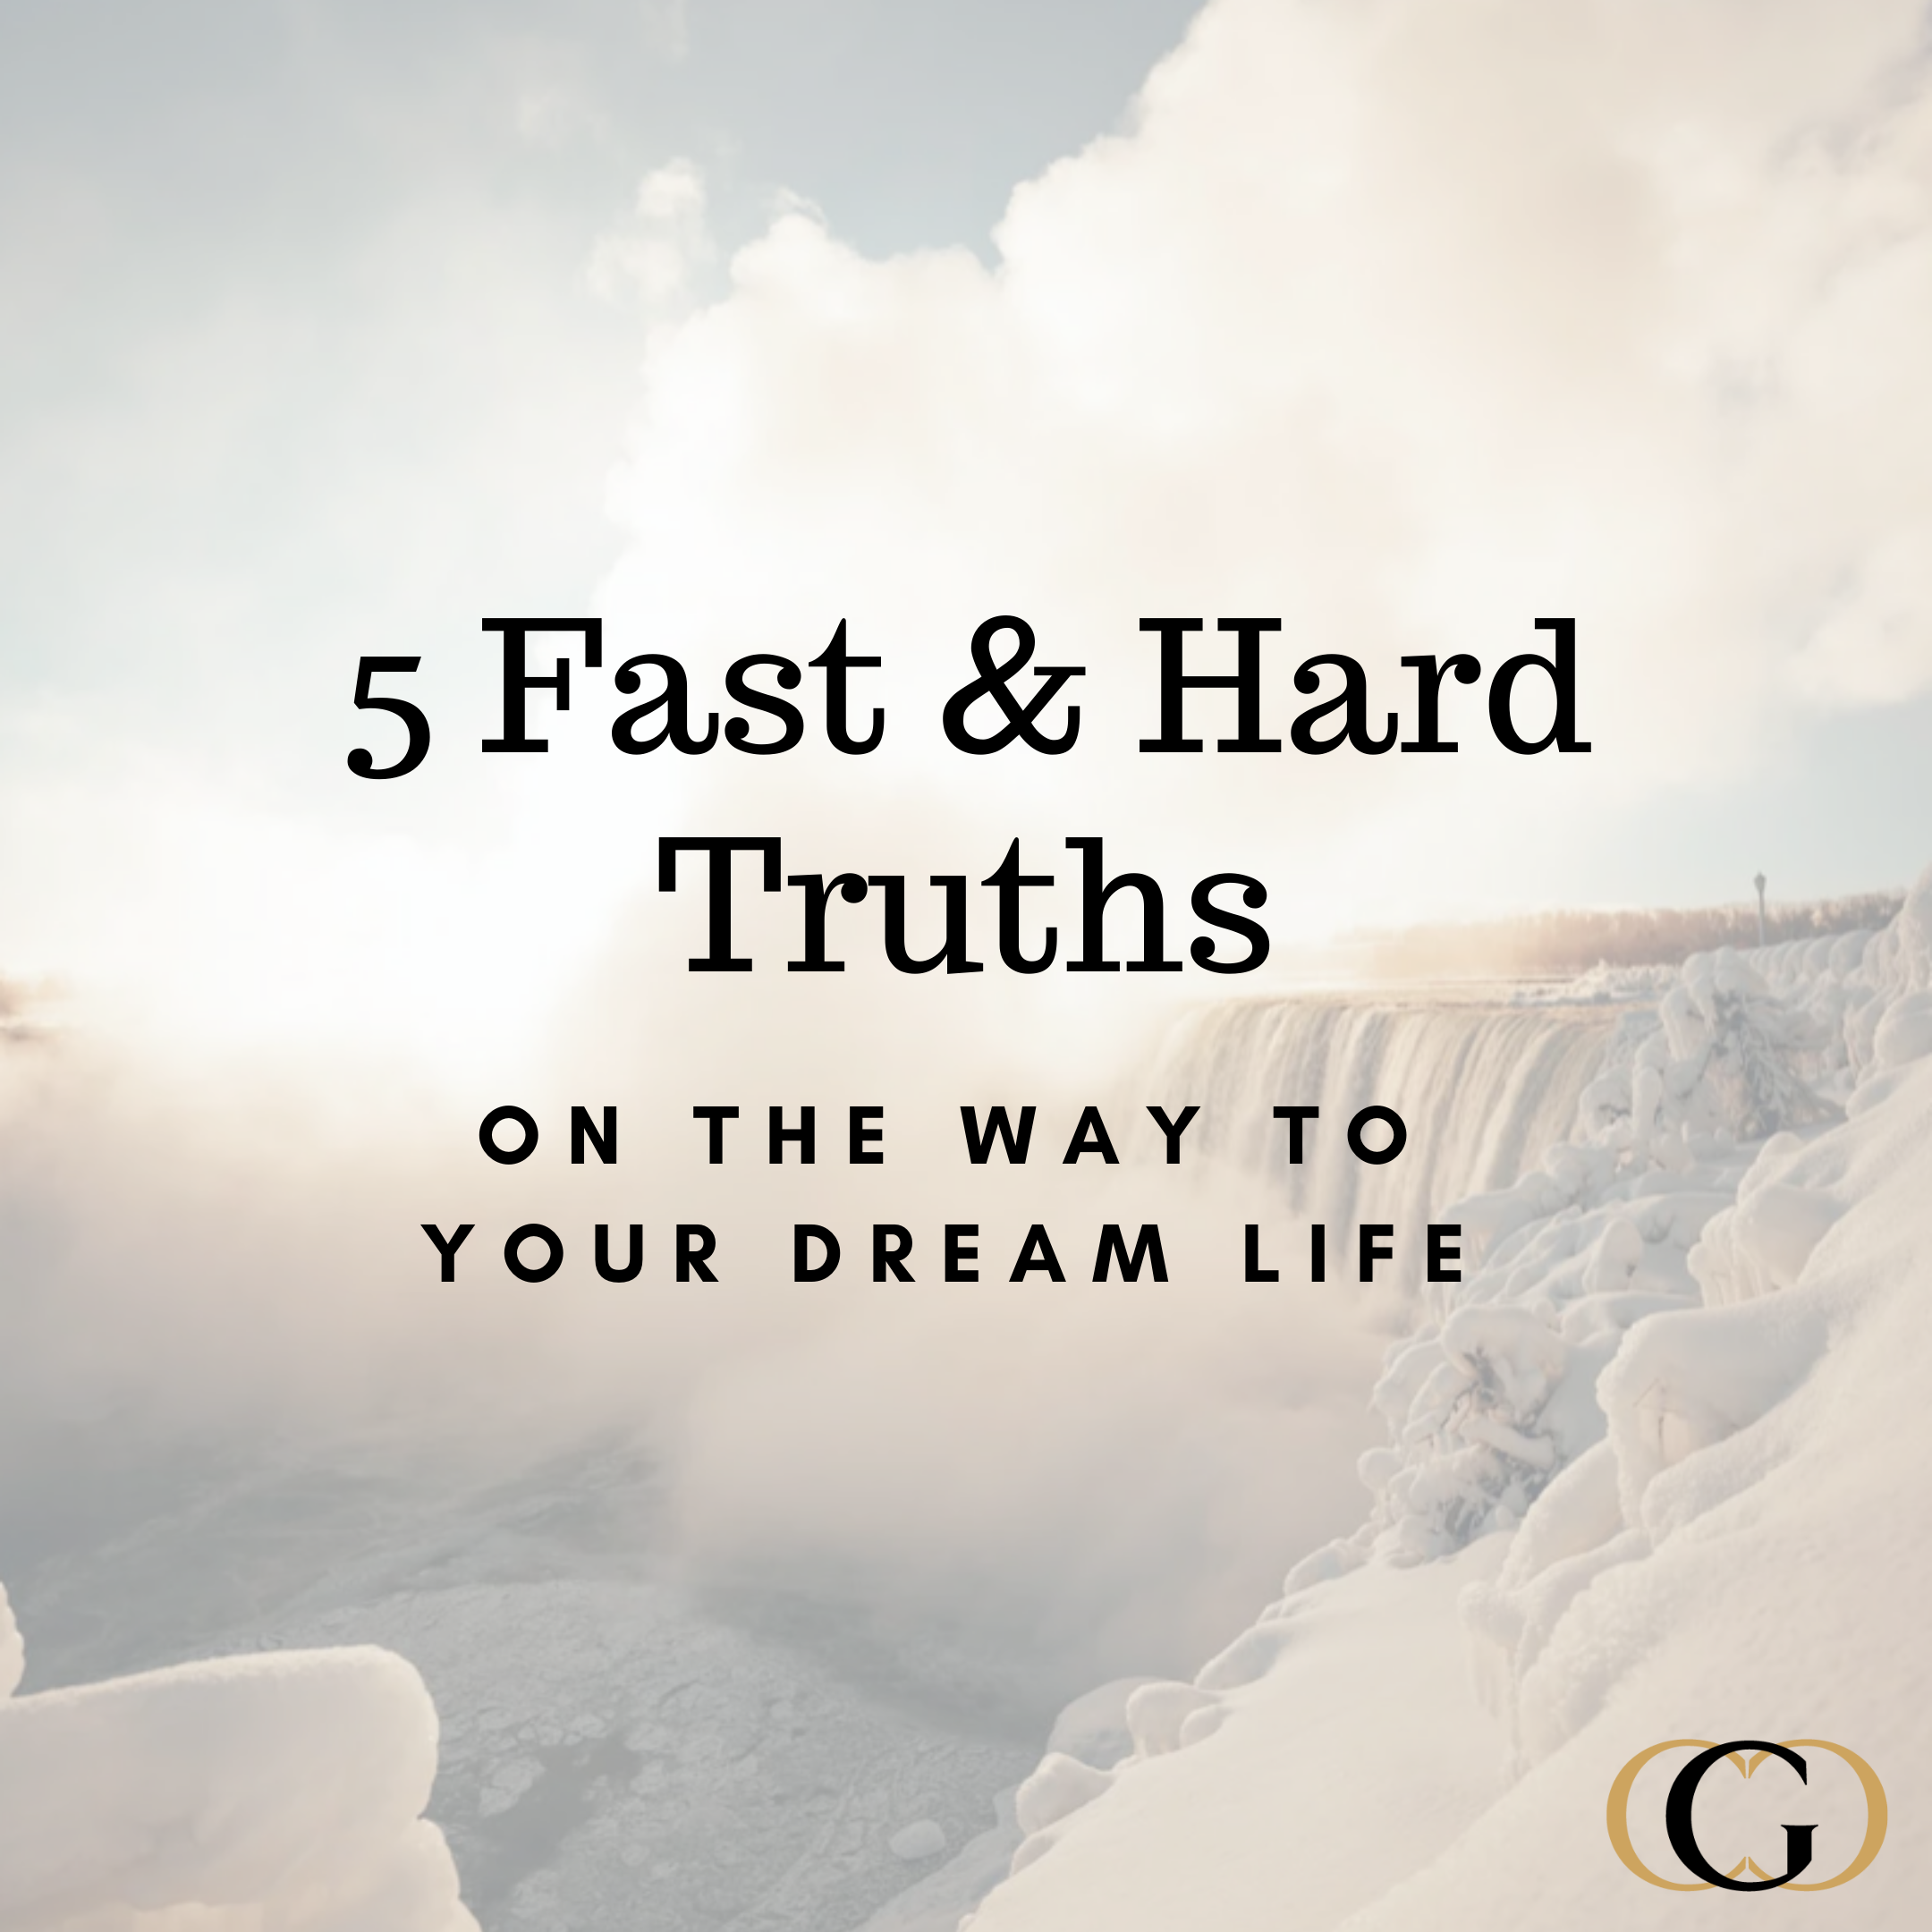 5 Fast & Hard Truths on the Way to Your Dream Life